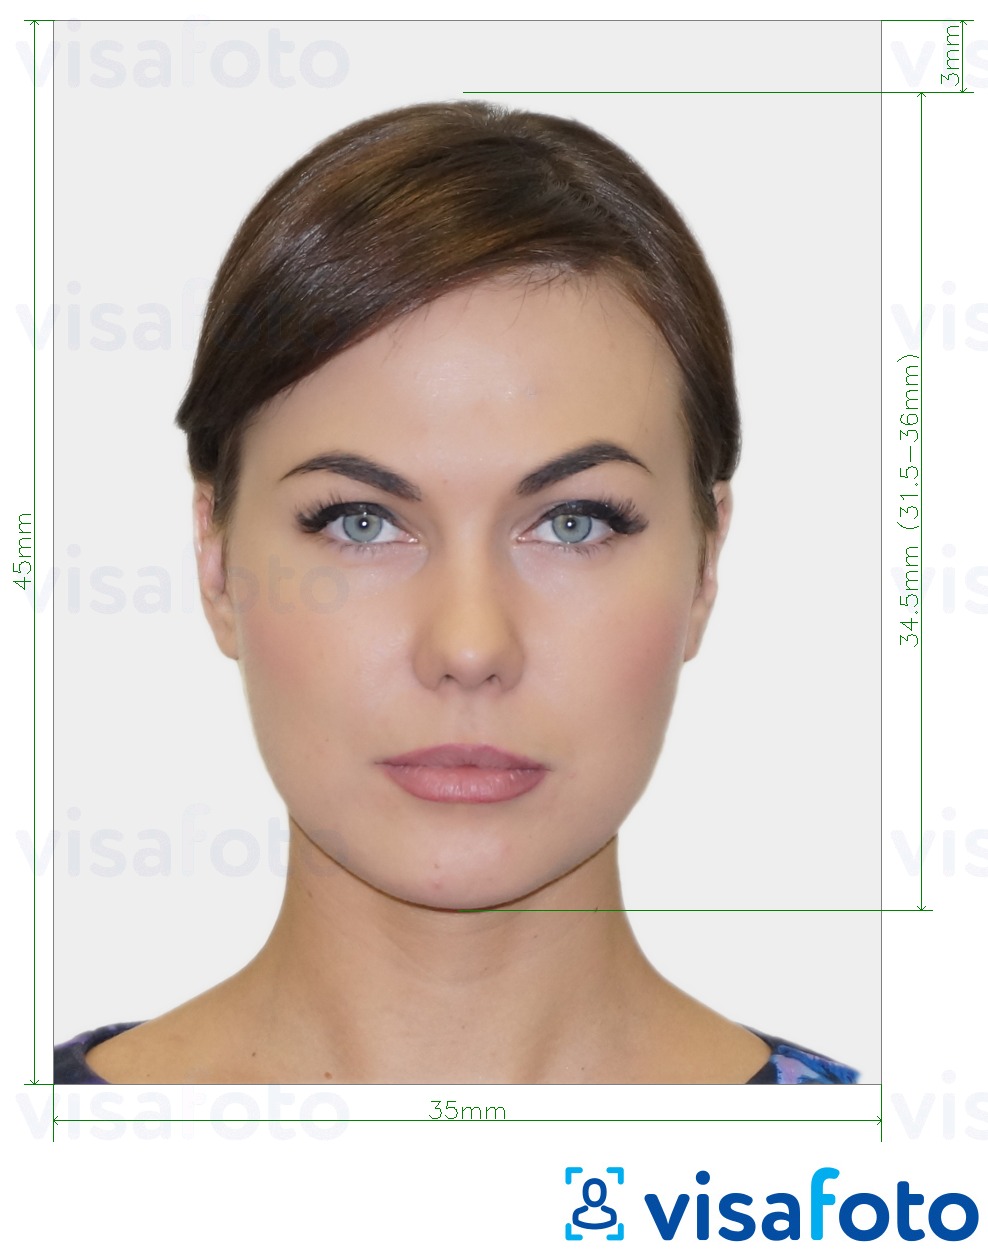 Example of photo for Germany Passport 35x45 mm (3.5x4.5 cm) with exact size specification